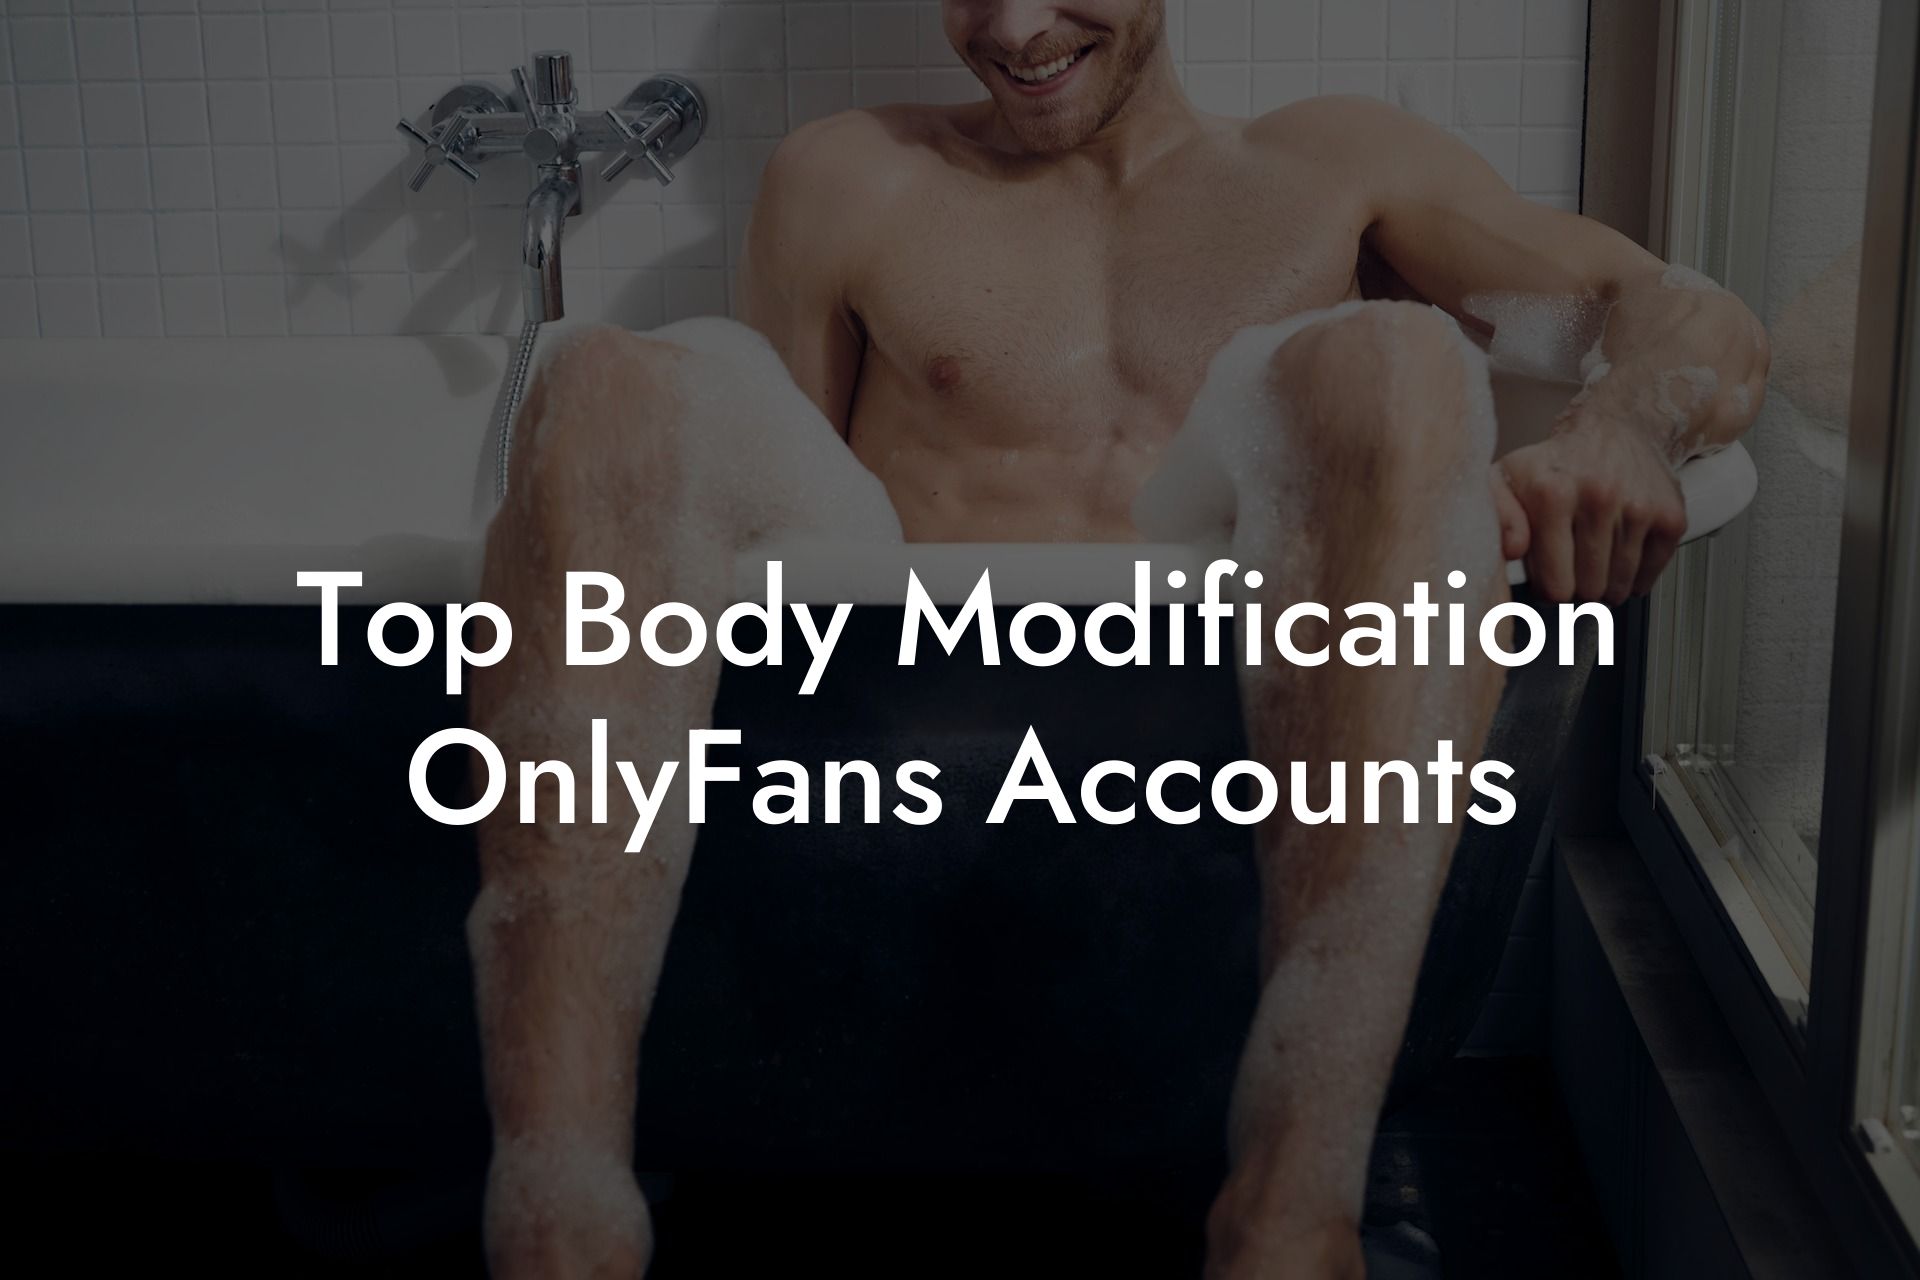 Top Body Modification OnlyFans Accounts